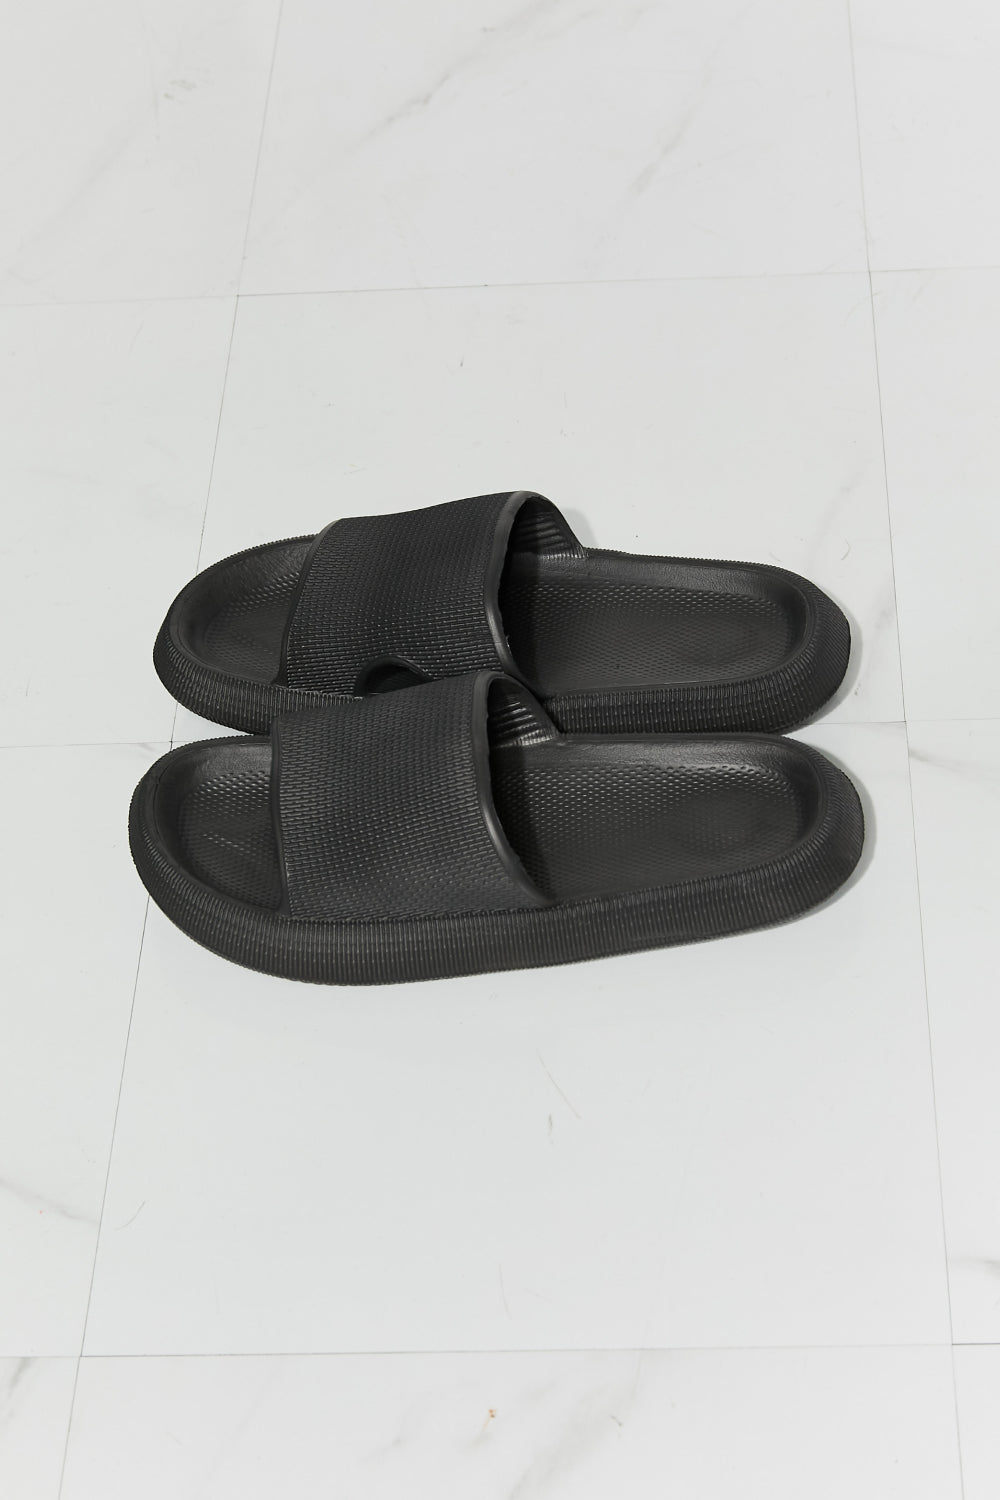 MMShoes Arms Around Me Open Toe Slide in Black COCO CRESS